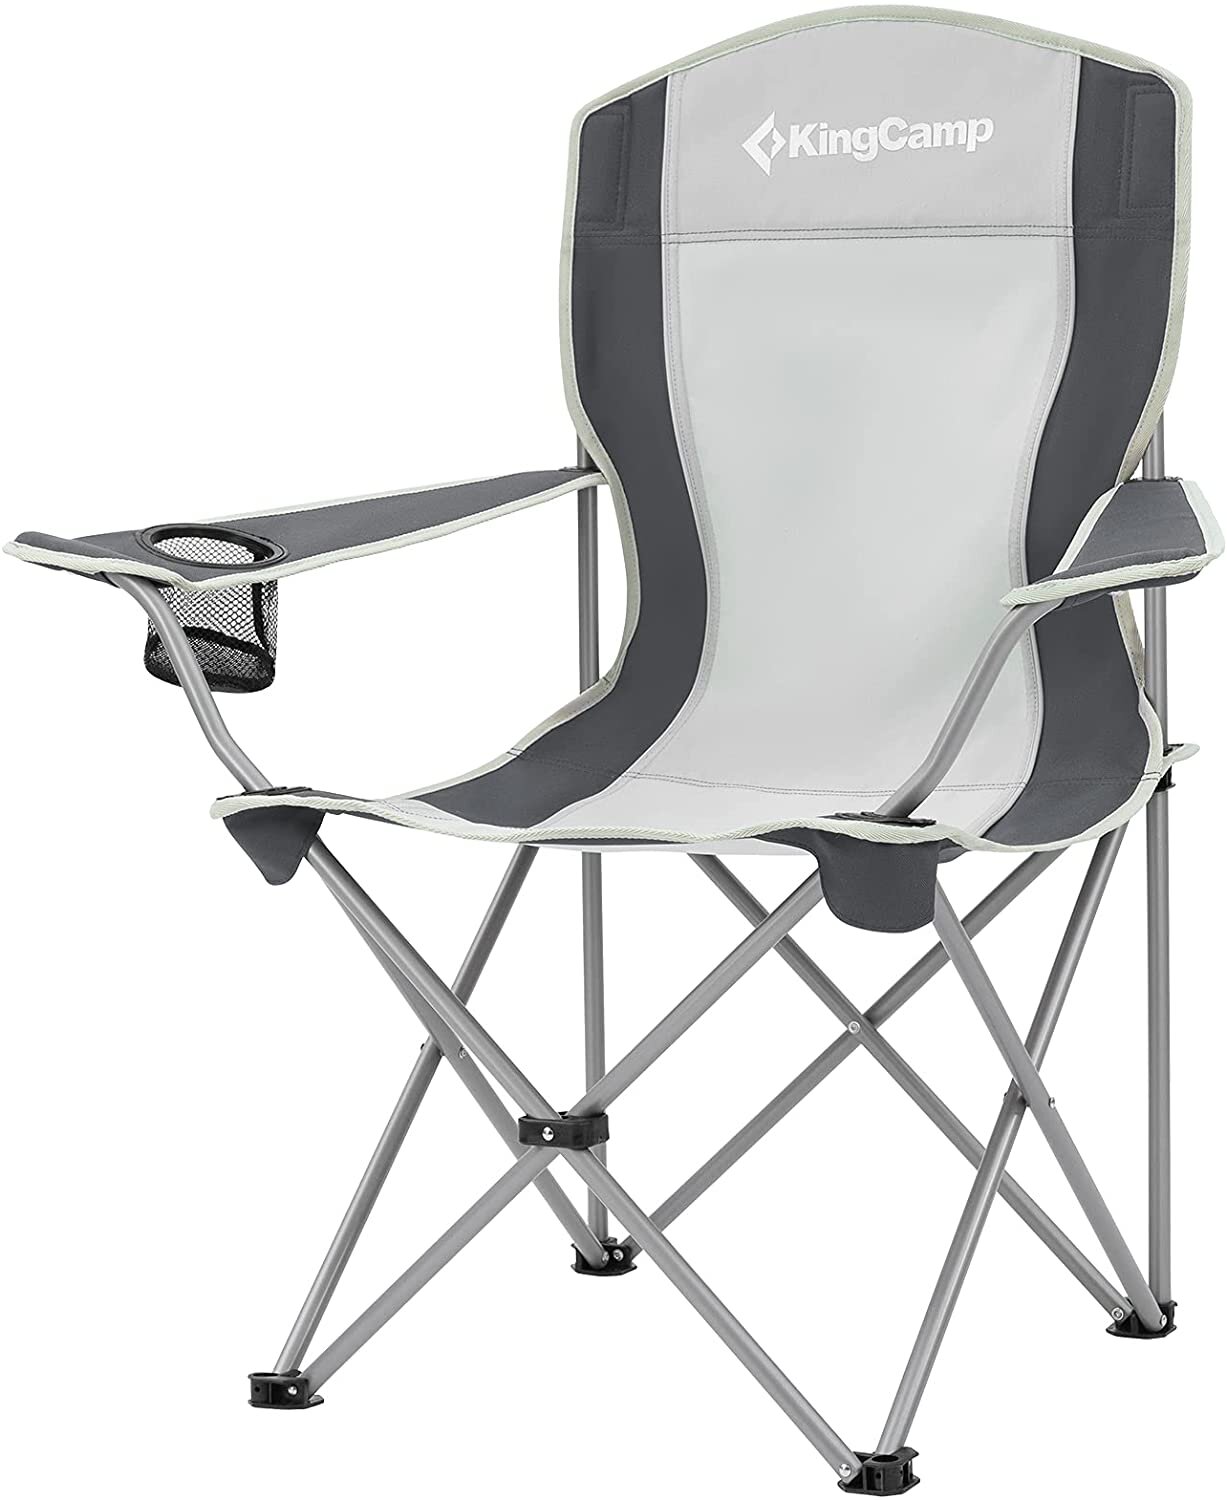 Aluminum Alloy Chair Camping Chair Beach Chair Portable Foldable Double Chair household items Outdoor Bench 